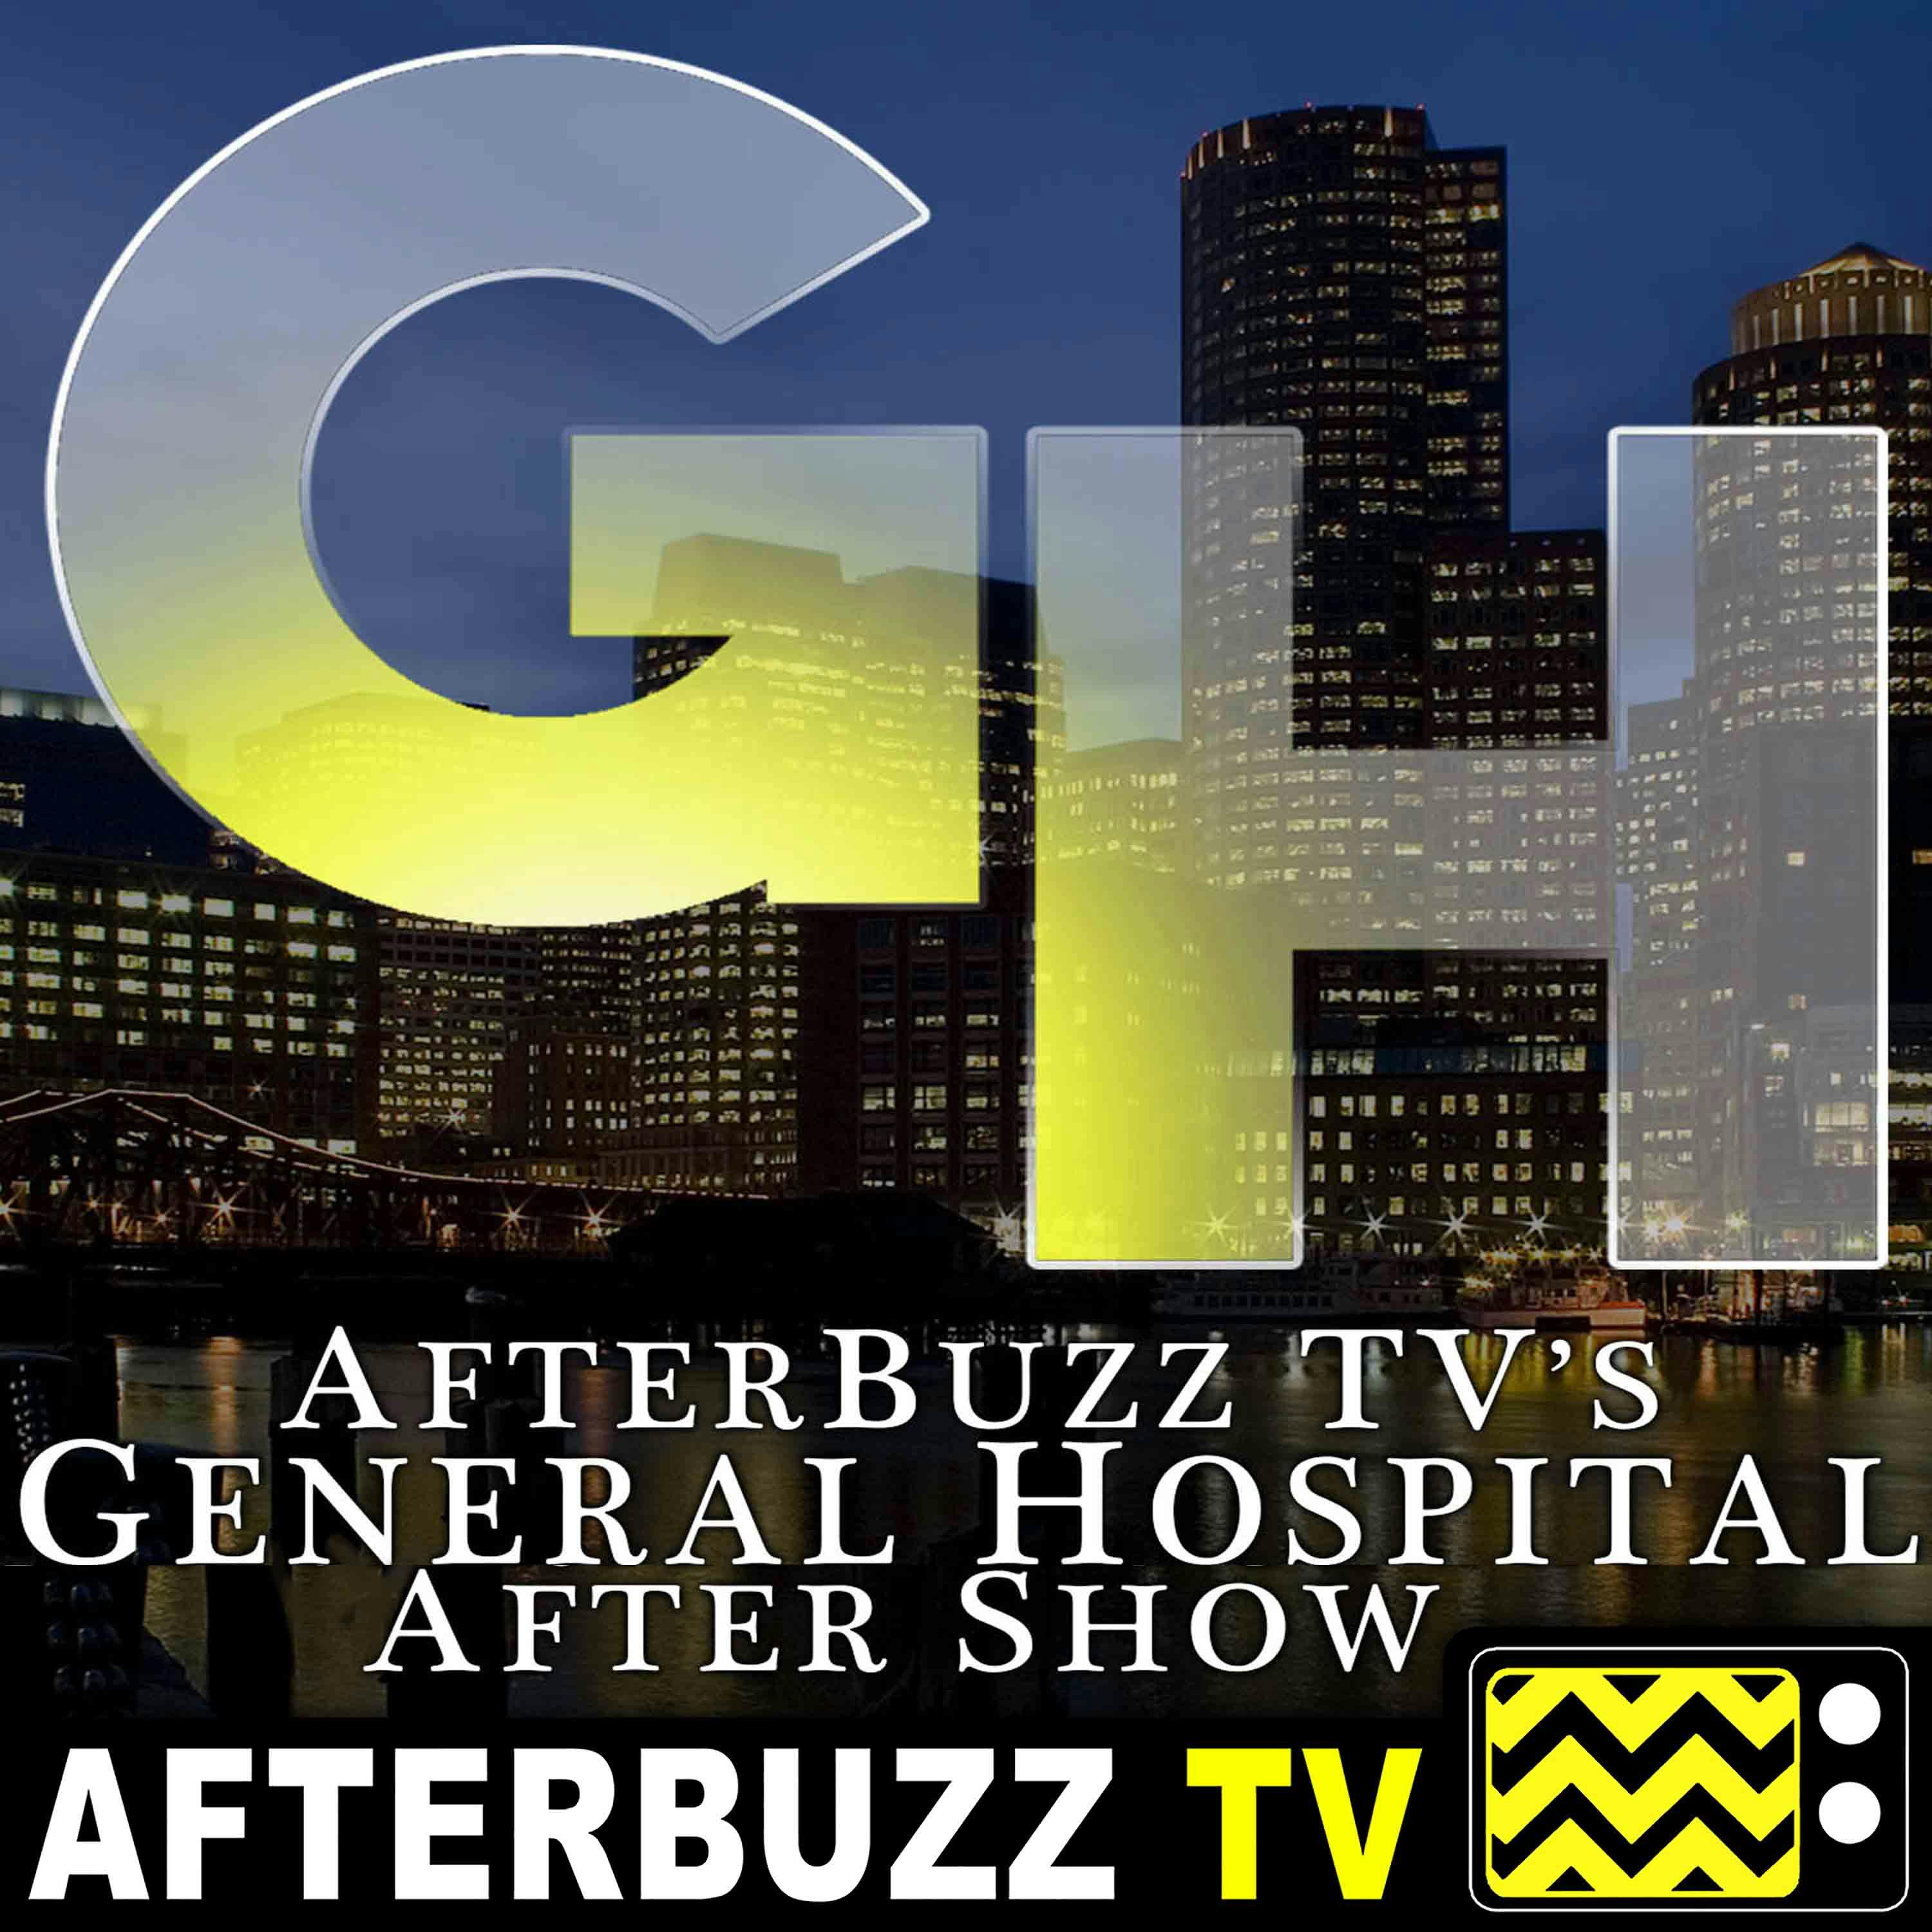 ’March 18th - March 22nd, 2019’ Review Of General Hospital